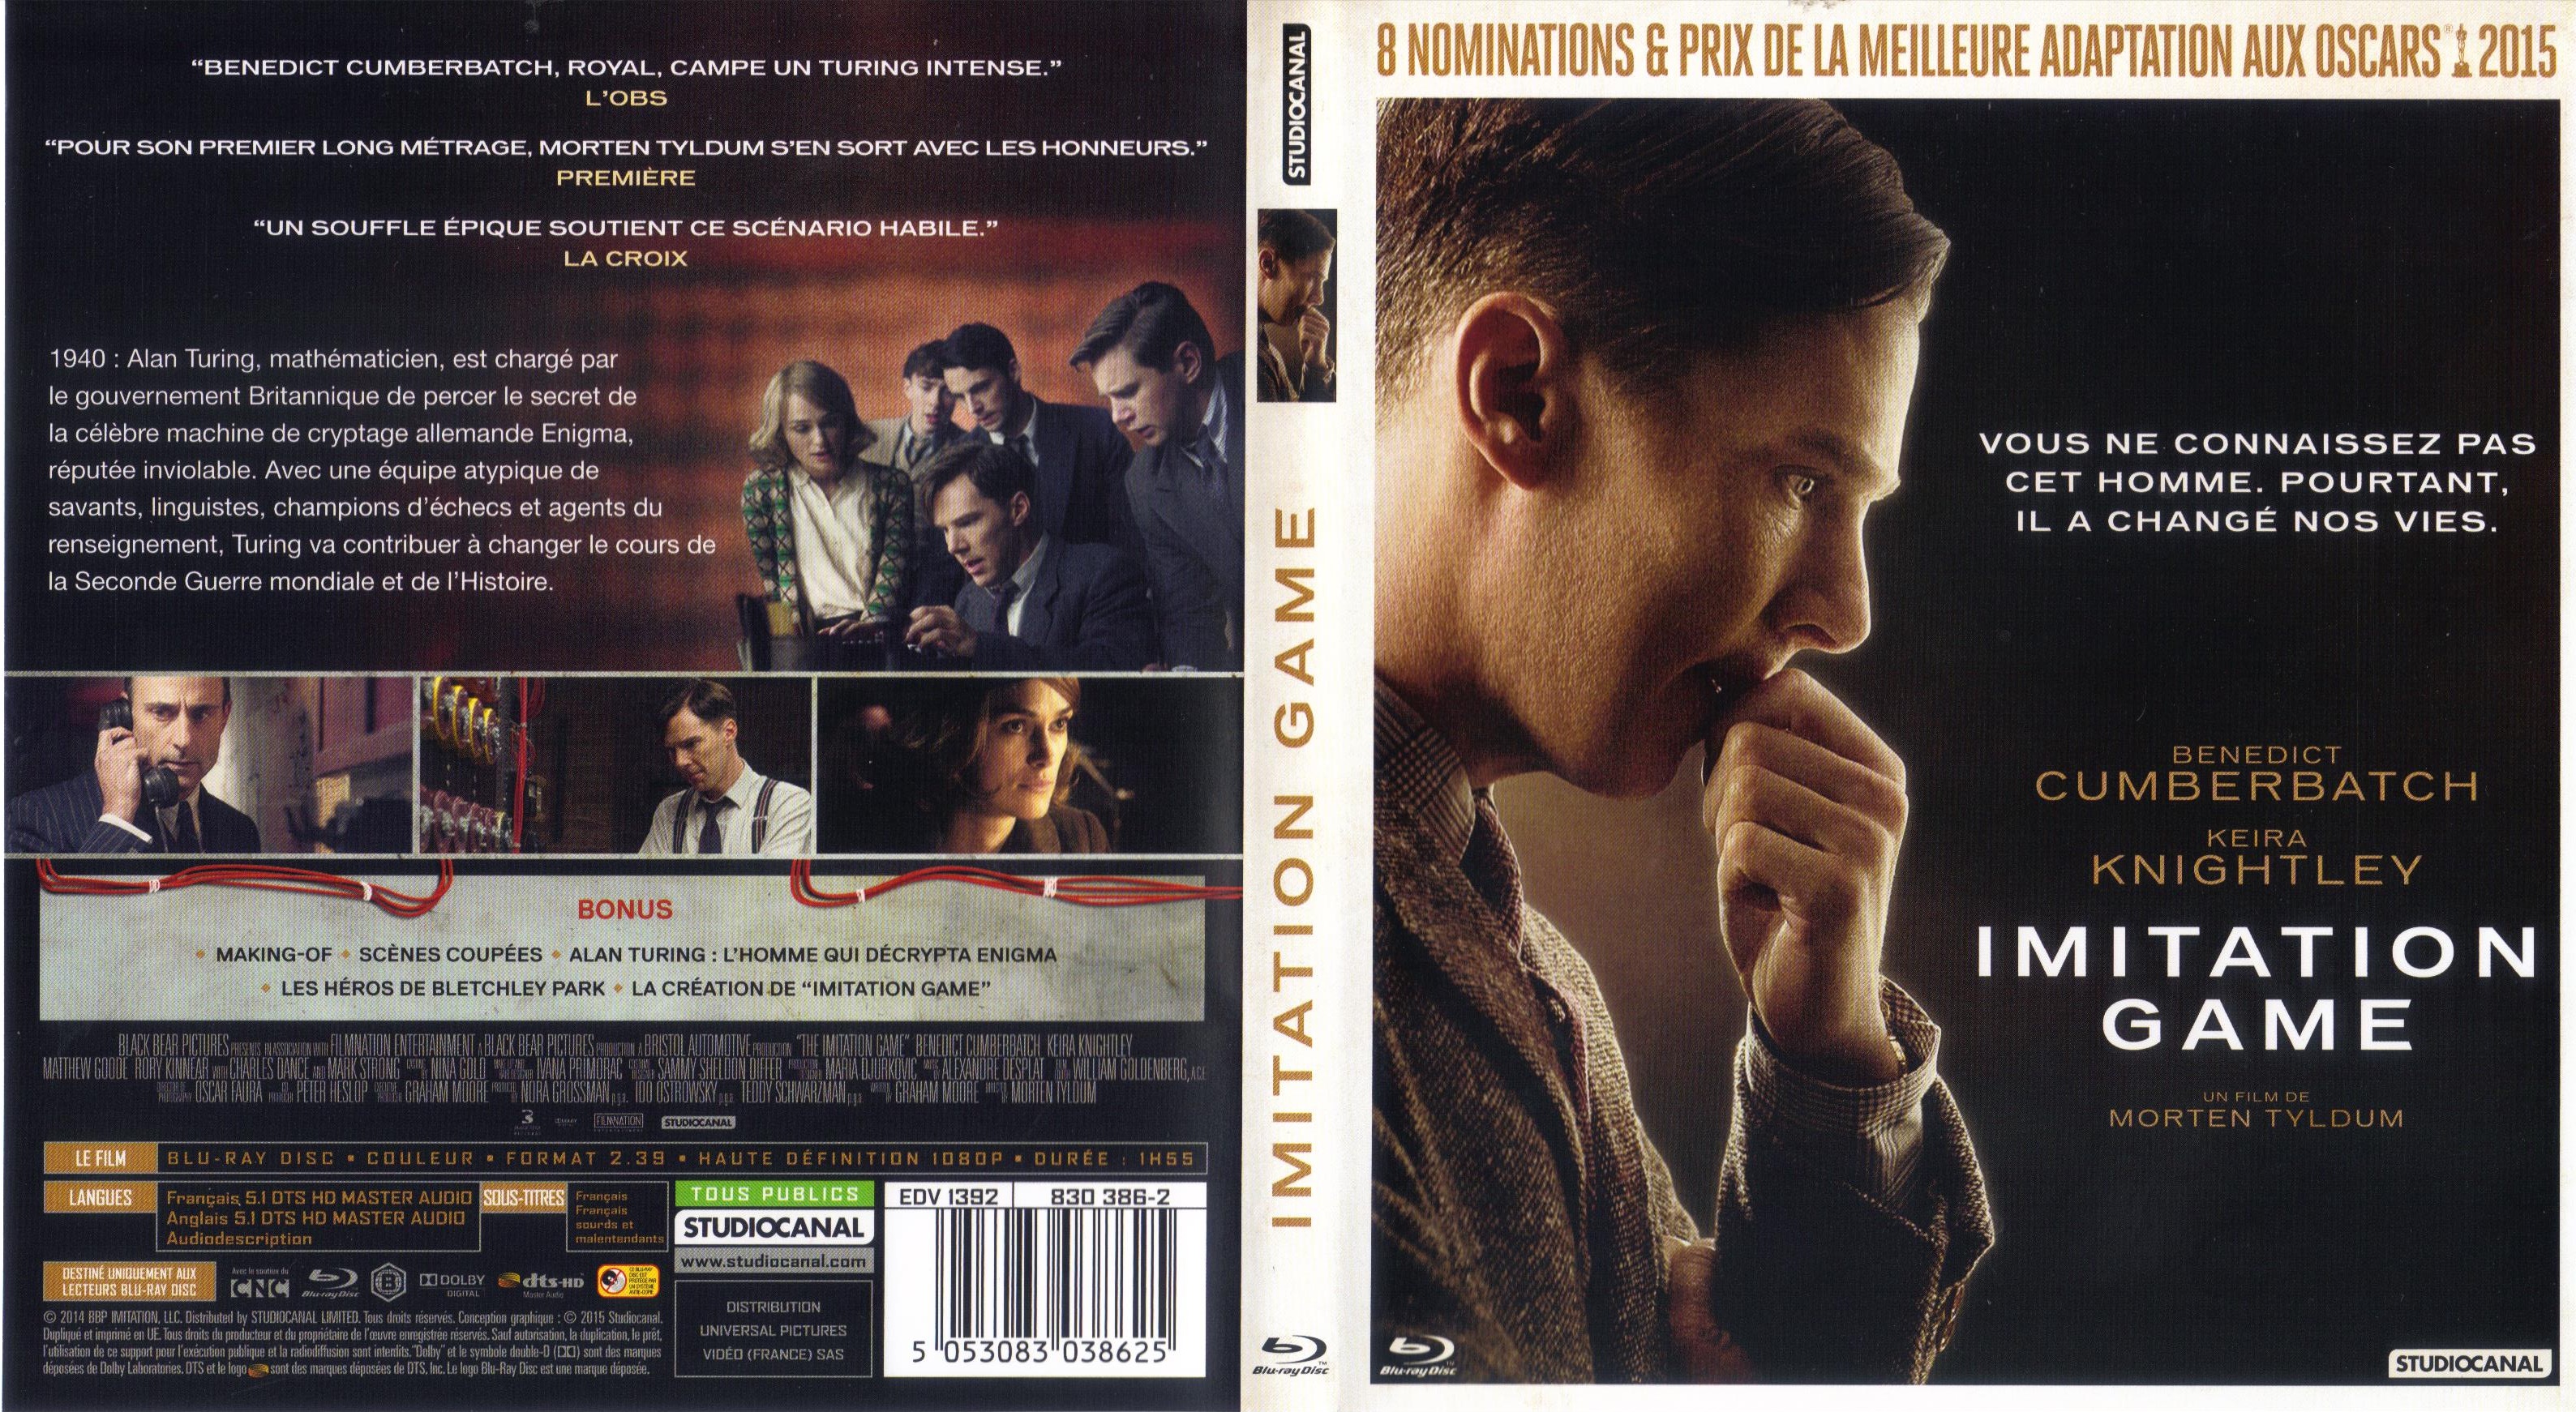 Jaquette DVD Imitation Game (BLU-RAY)